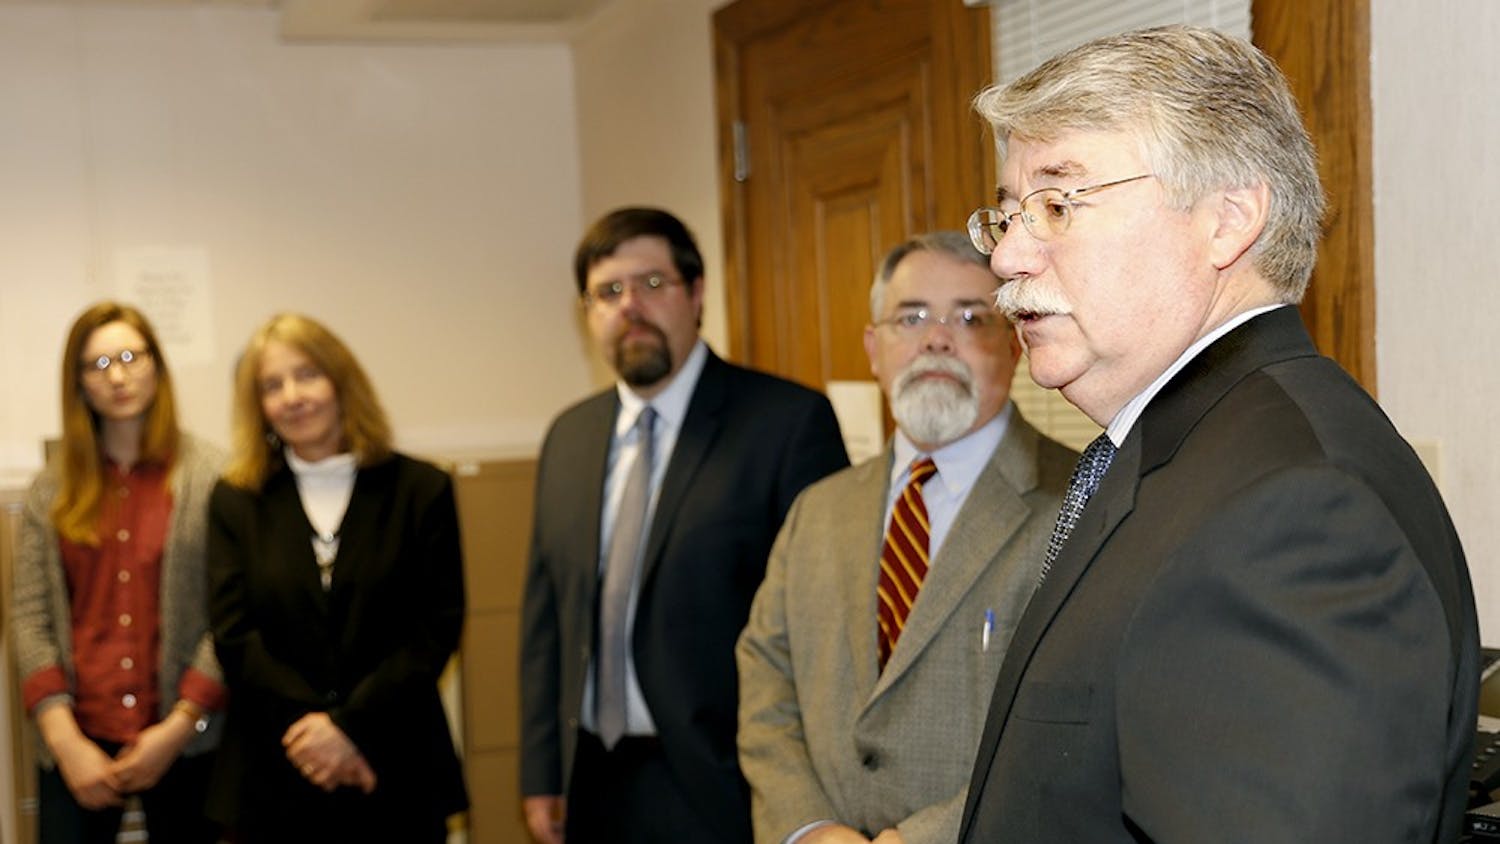 Indiana Attorney General Greg Zoeller, left, speaks to members of Indiana Legal Services, Inc. Thursday at the Indiana Legal Services, Inc. building. 